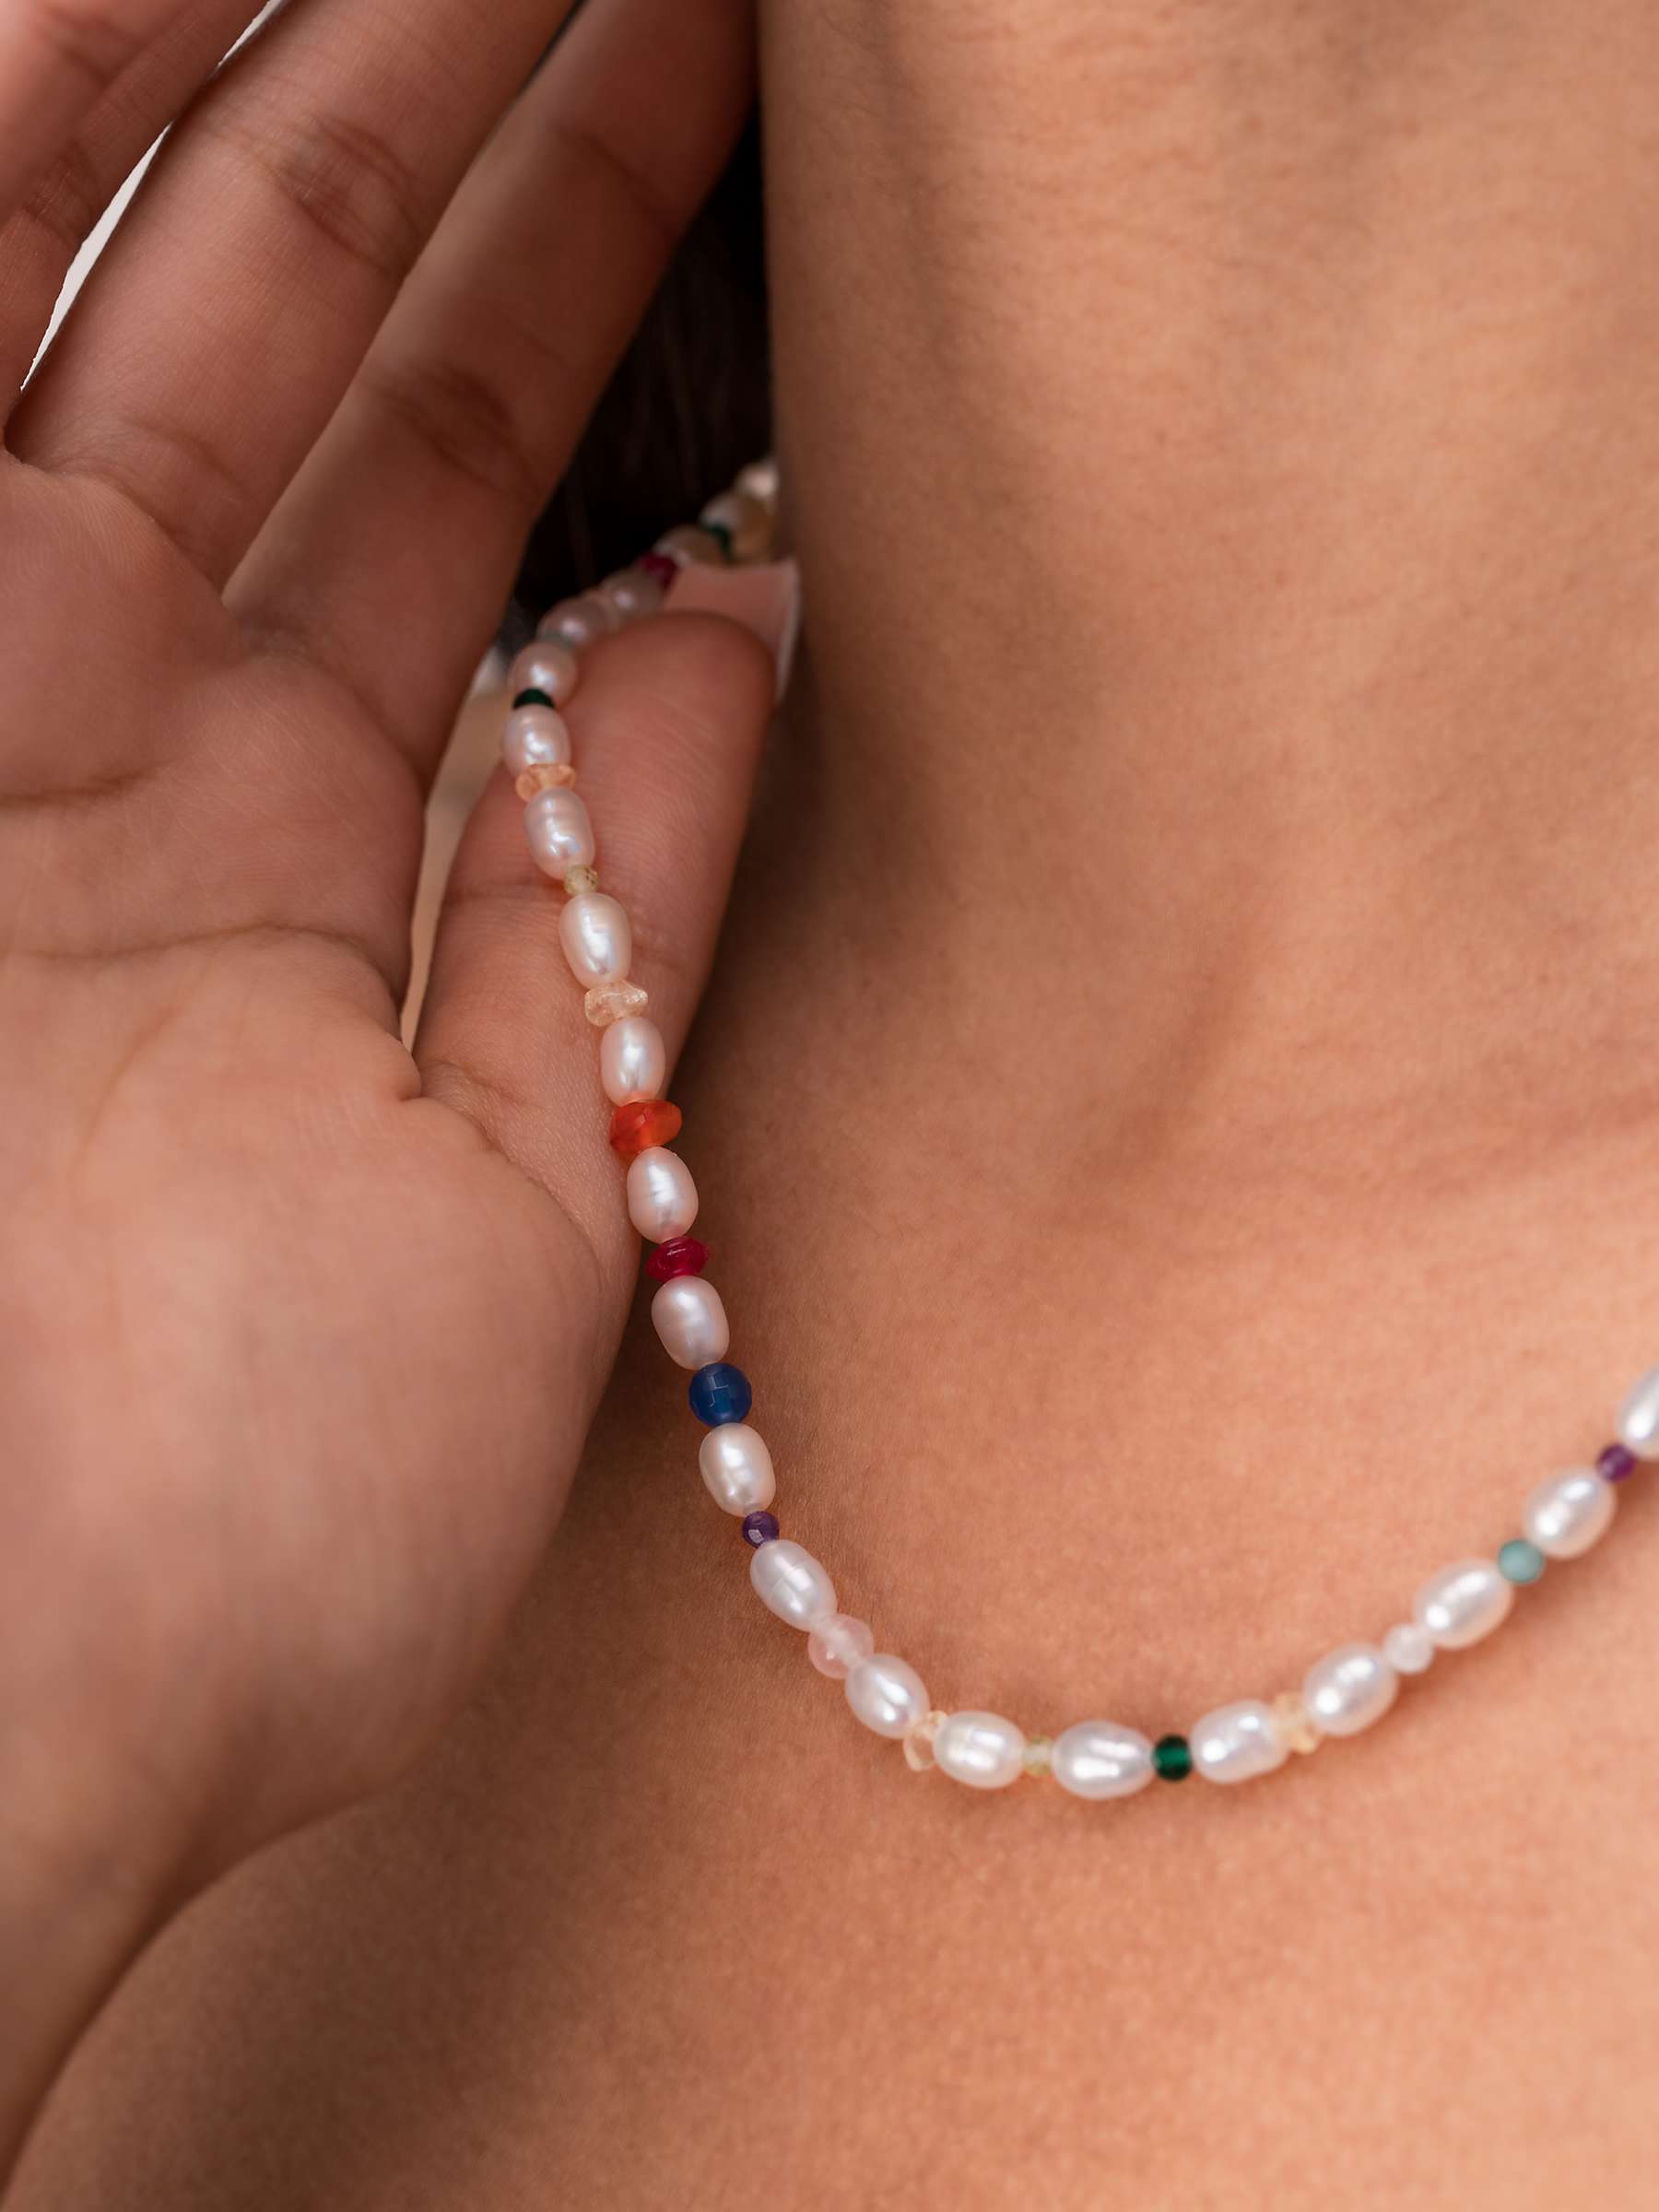 Buy Dower & Hall Carnival Mixed Stone Freshwater Pearl Collar Necklace, White/Multi Online at johnlewis.com